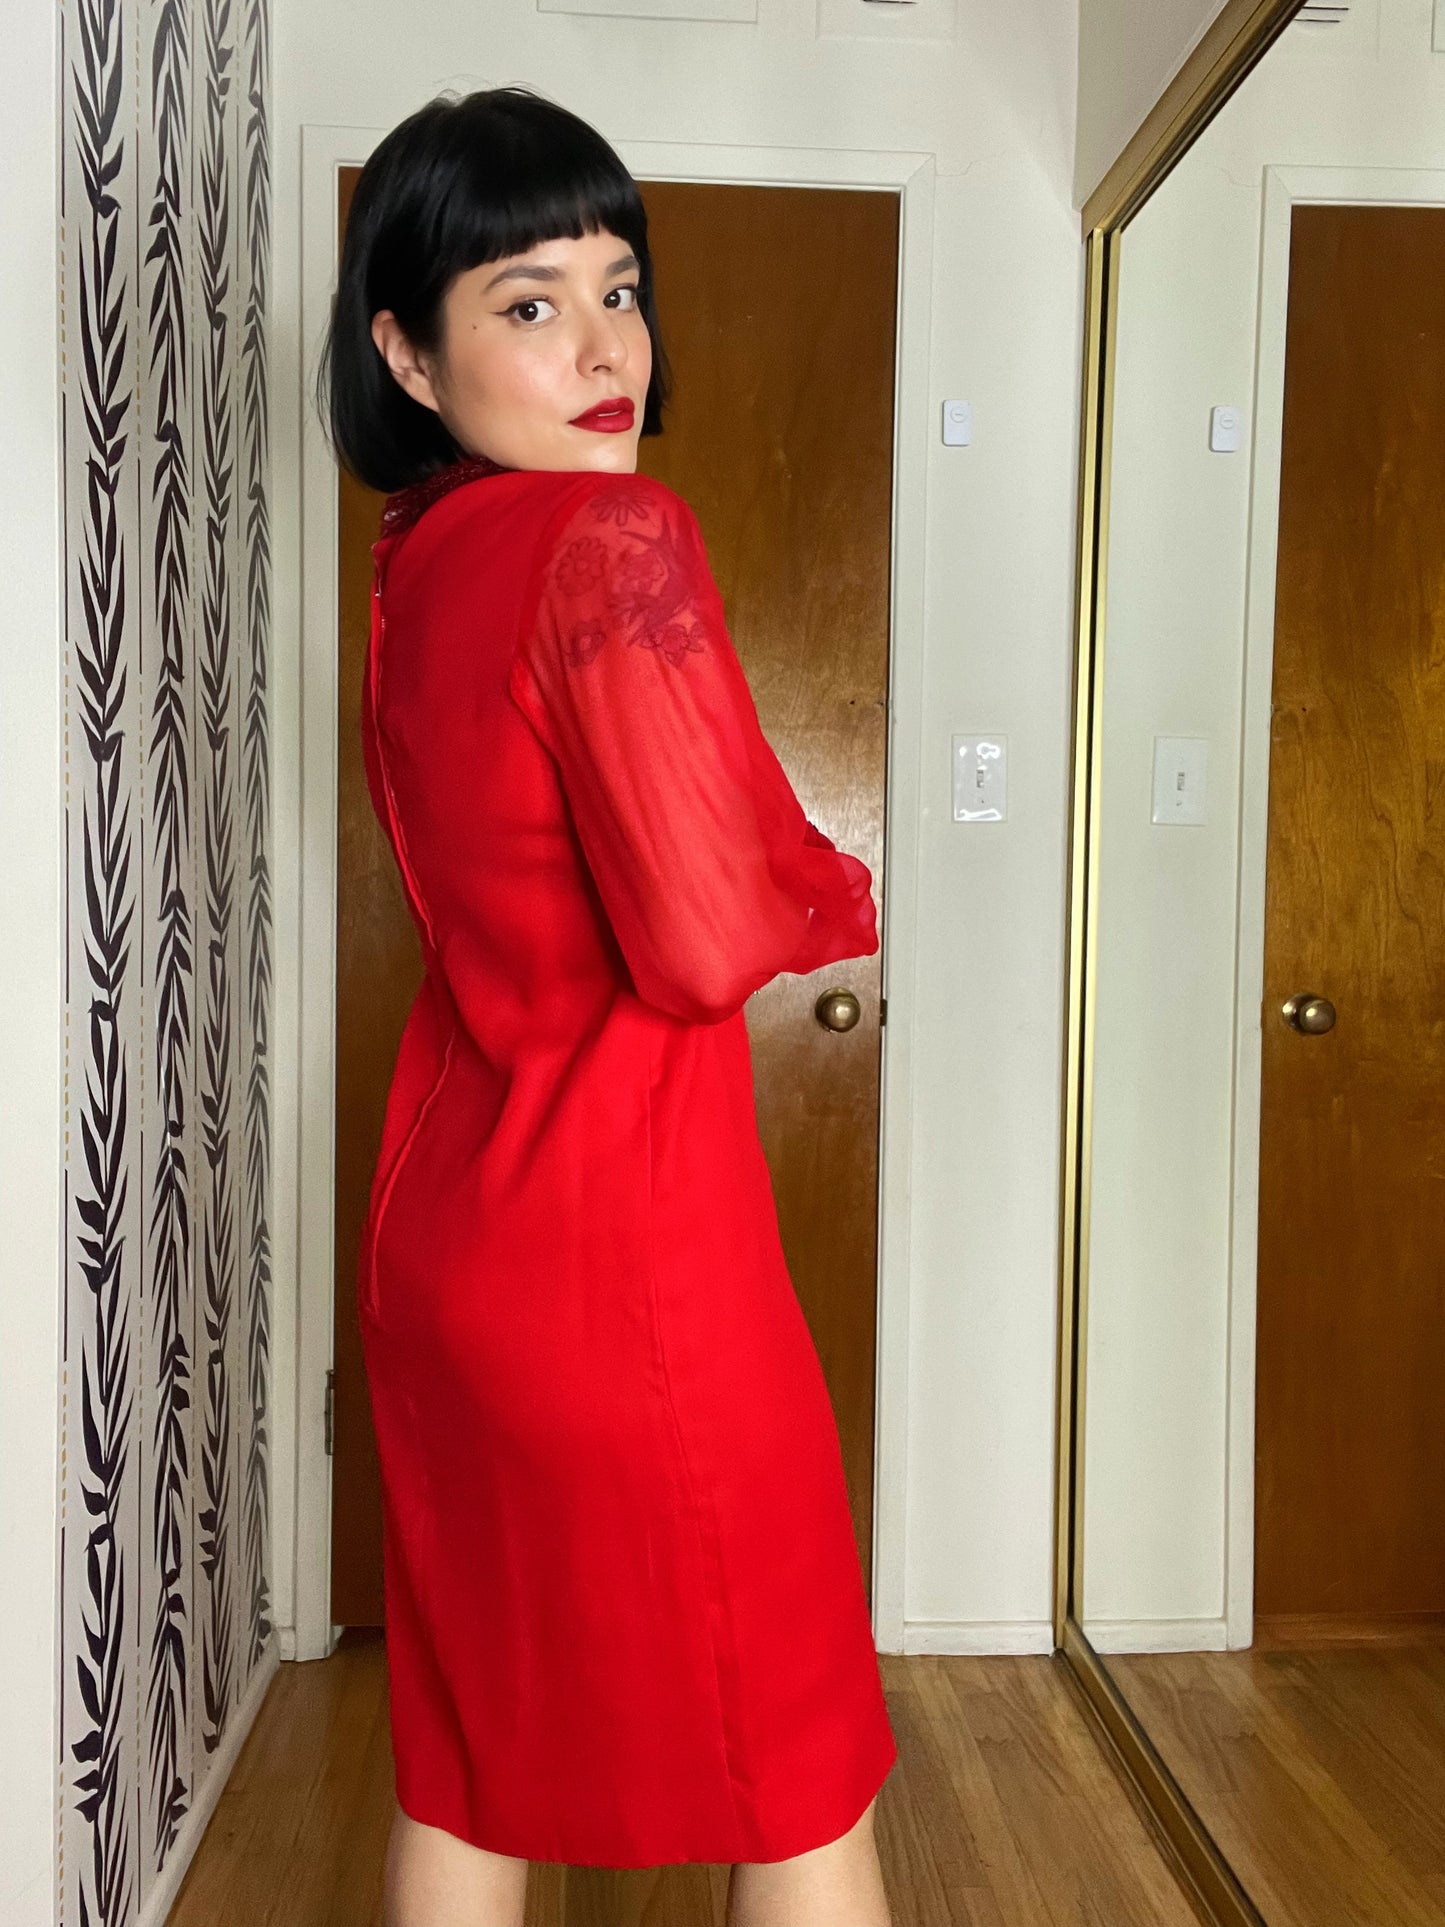 Vintage 60s Mad Men Style Red Chiffon Beaded Cocktail Dress Best Fits Sizes S-M